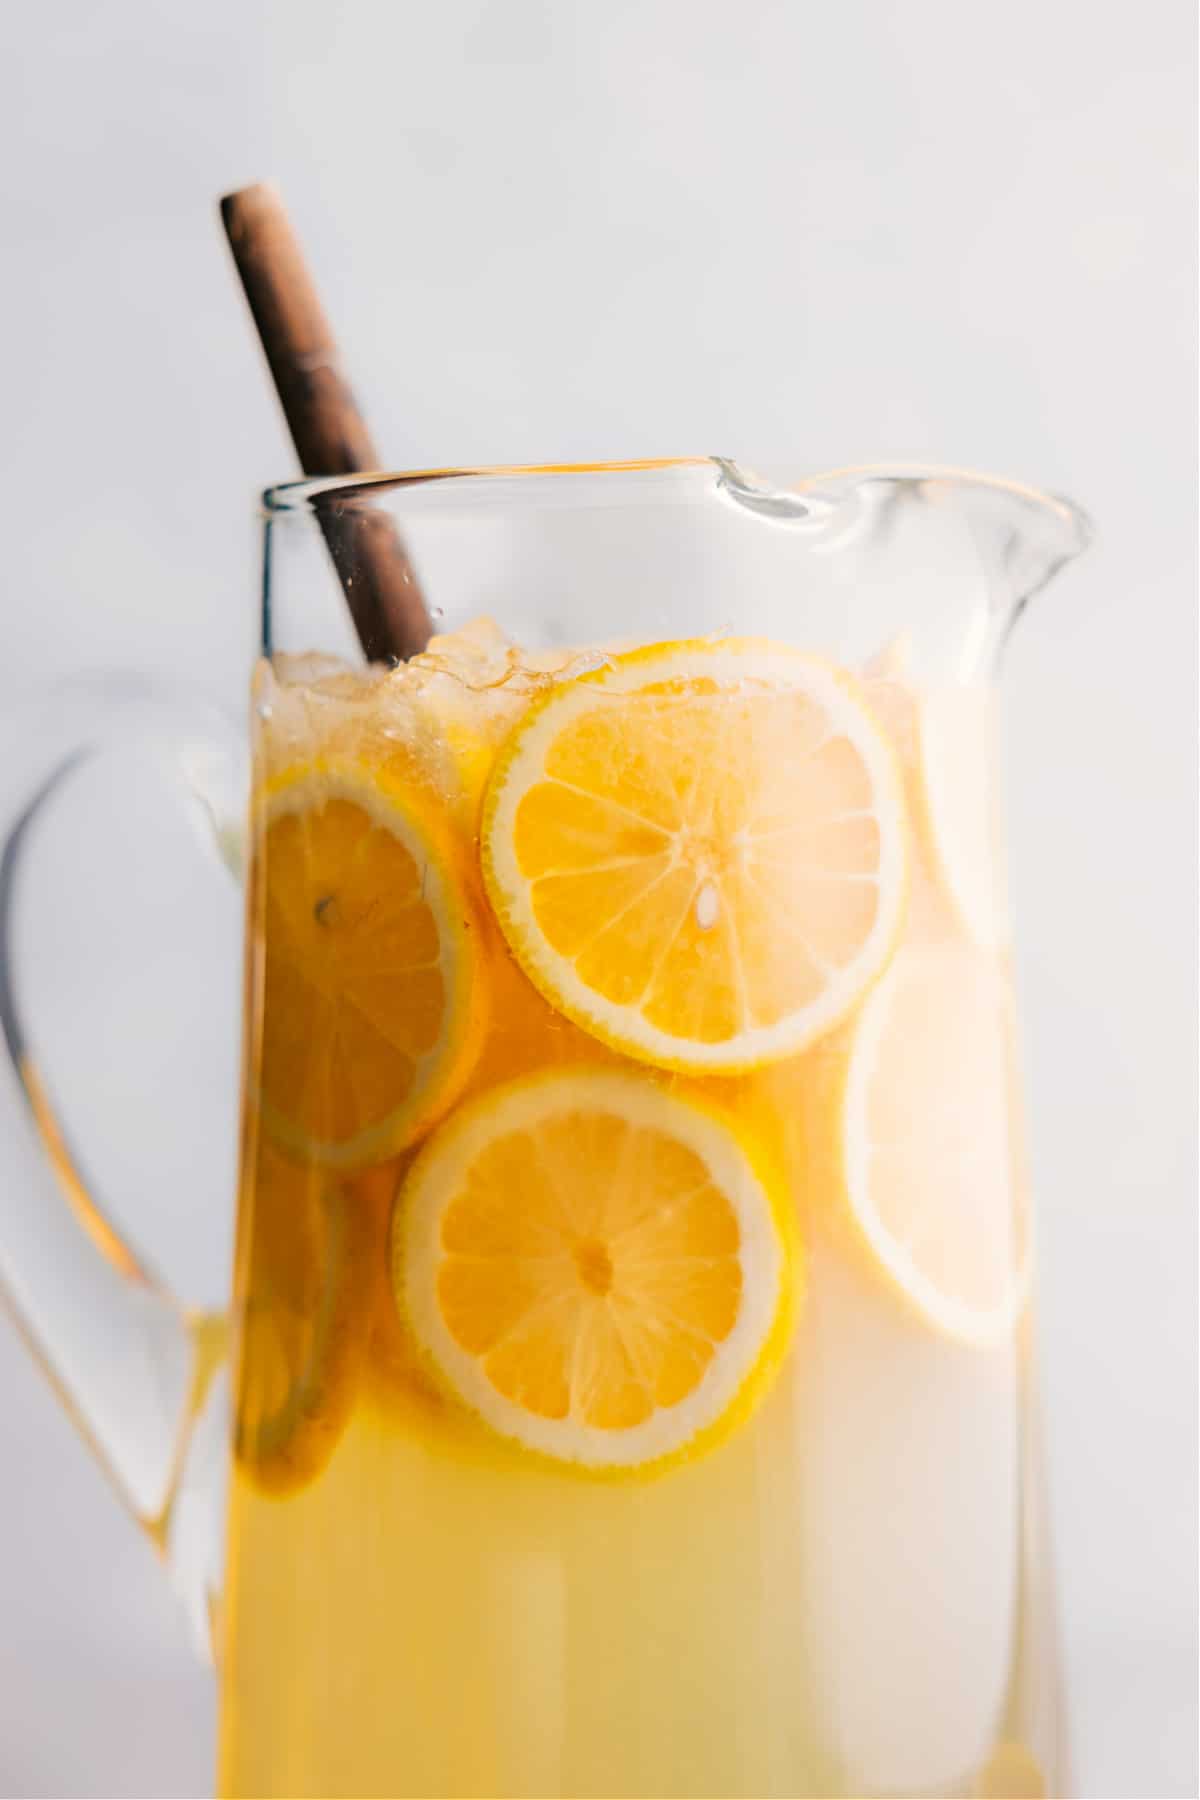 Lemonade in a pitcher ready to be served, garnished with fresh lemons.